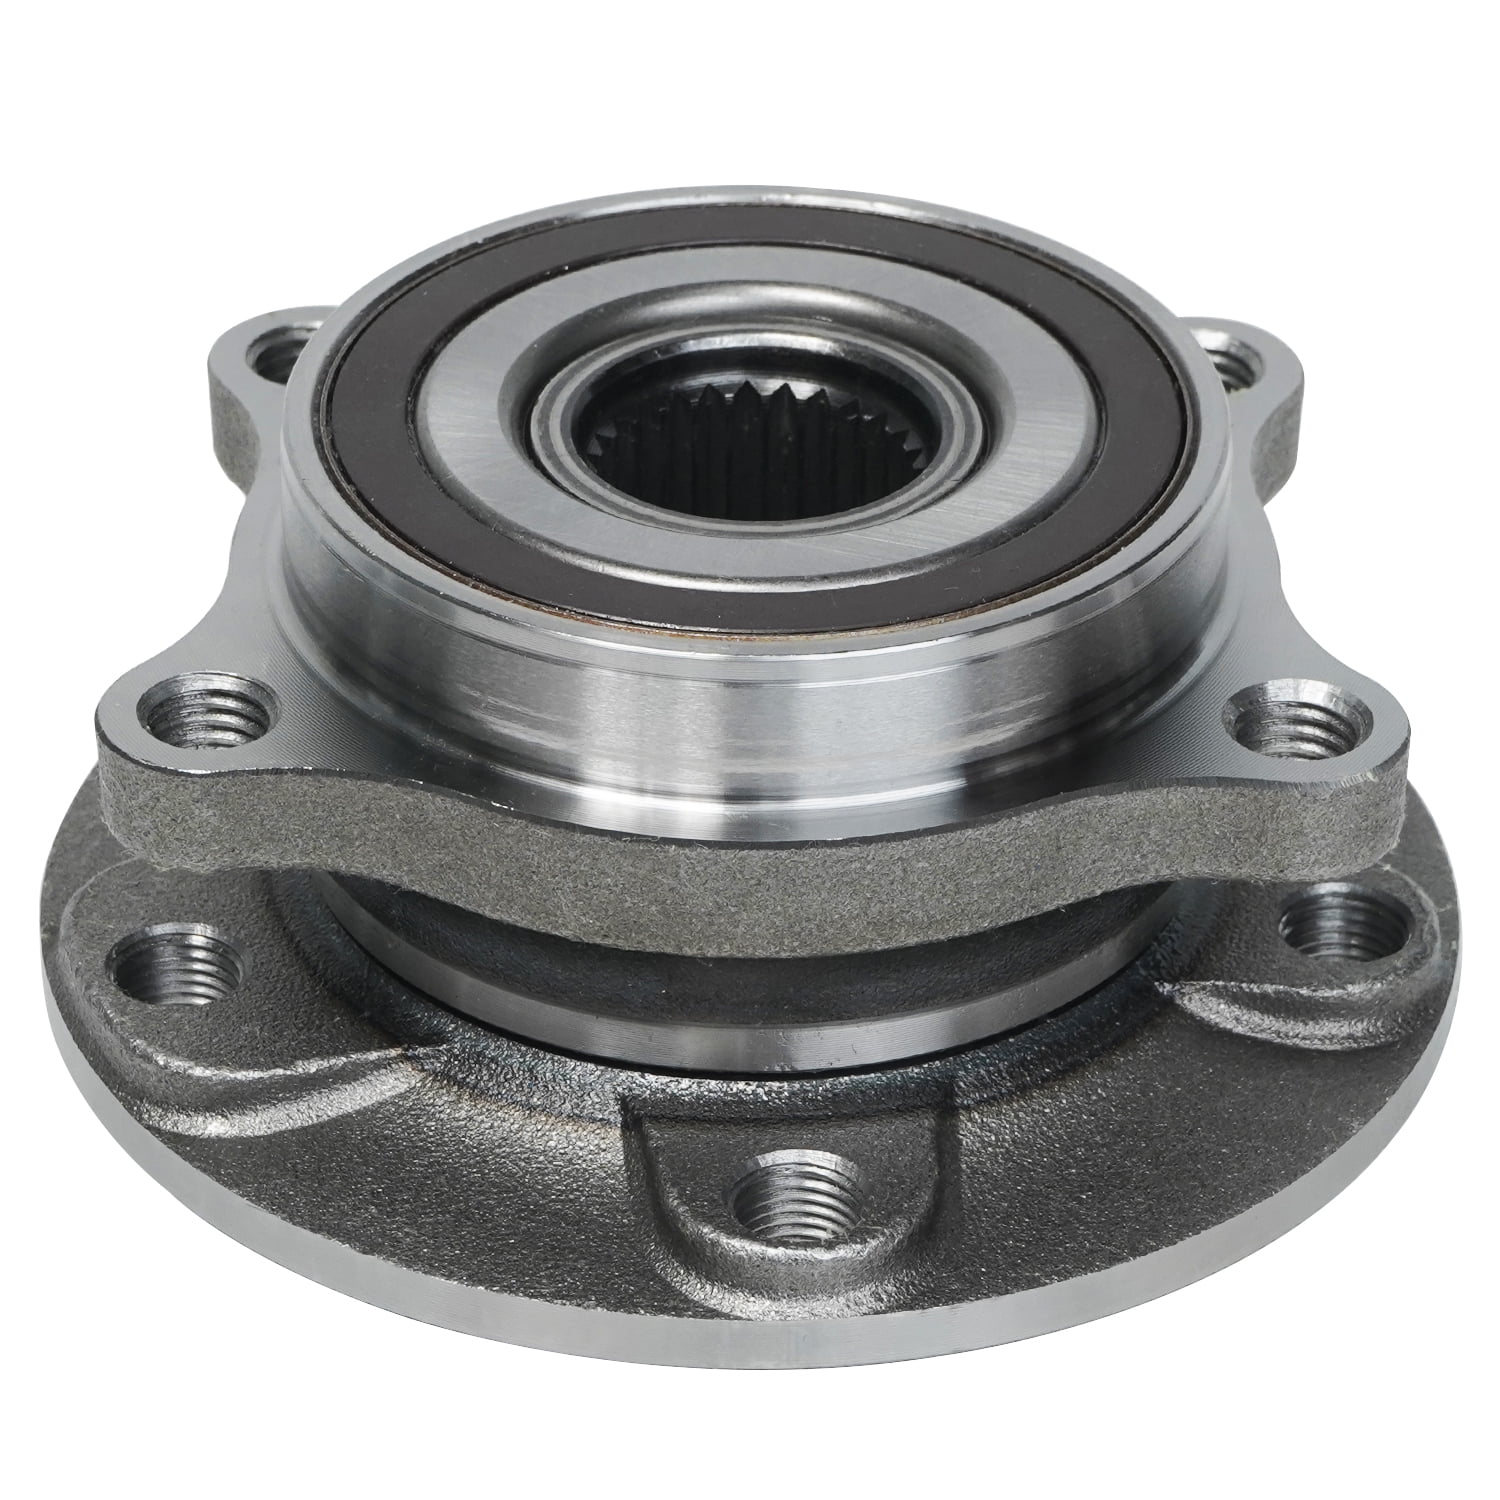 All 4 New Front & Rear Wheel Bearing & Hub Assembly for 2013-2016 Dodge Dart 